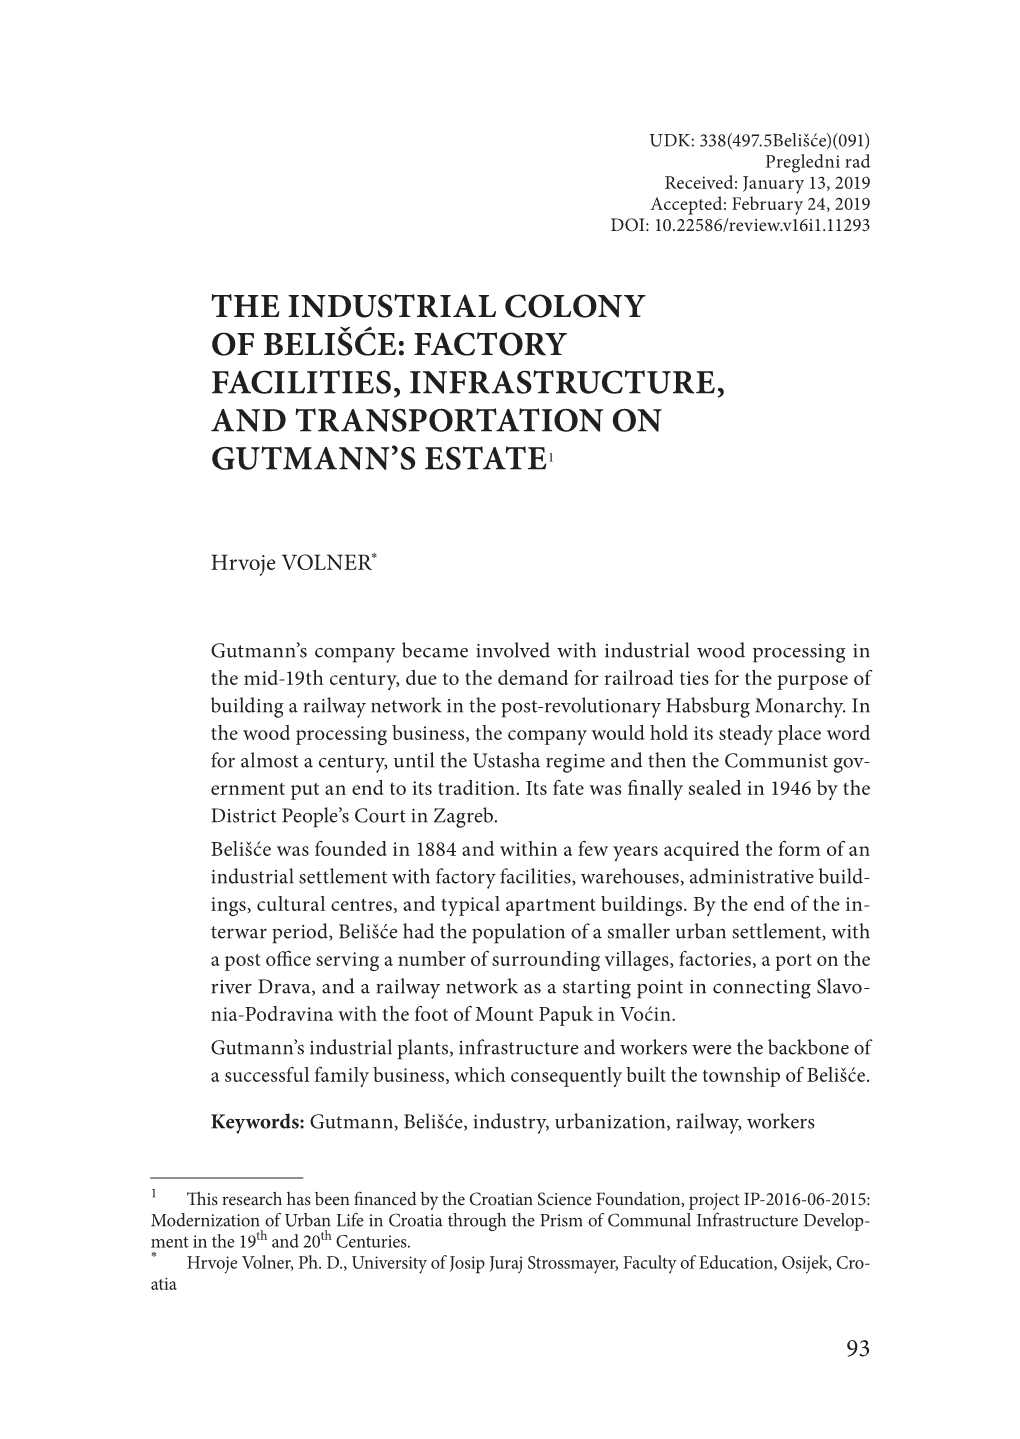 The Industrial Colony of Belišće: Factory Facilities, Infrastructure, and Transportation on Gutmann's Estate1